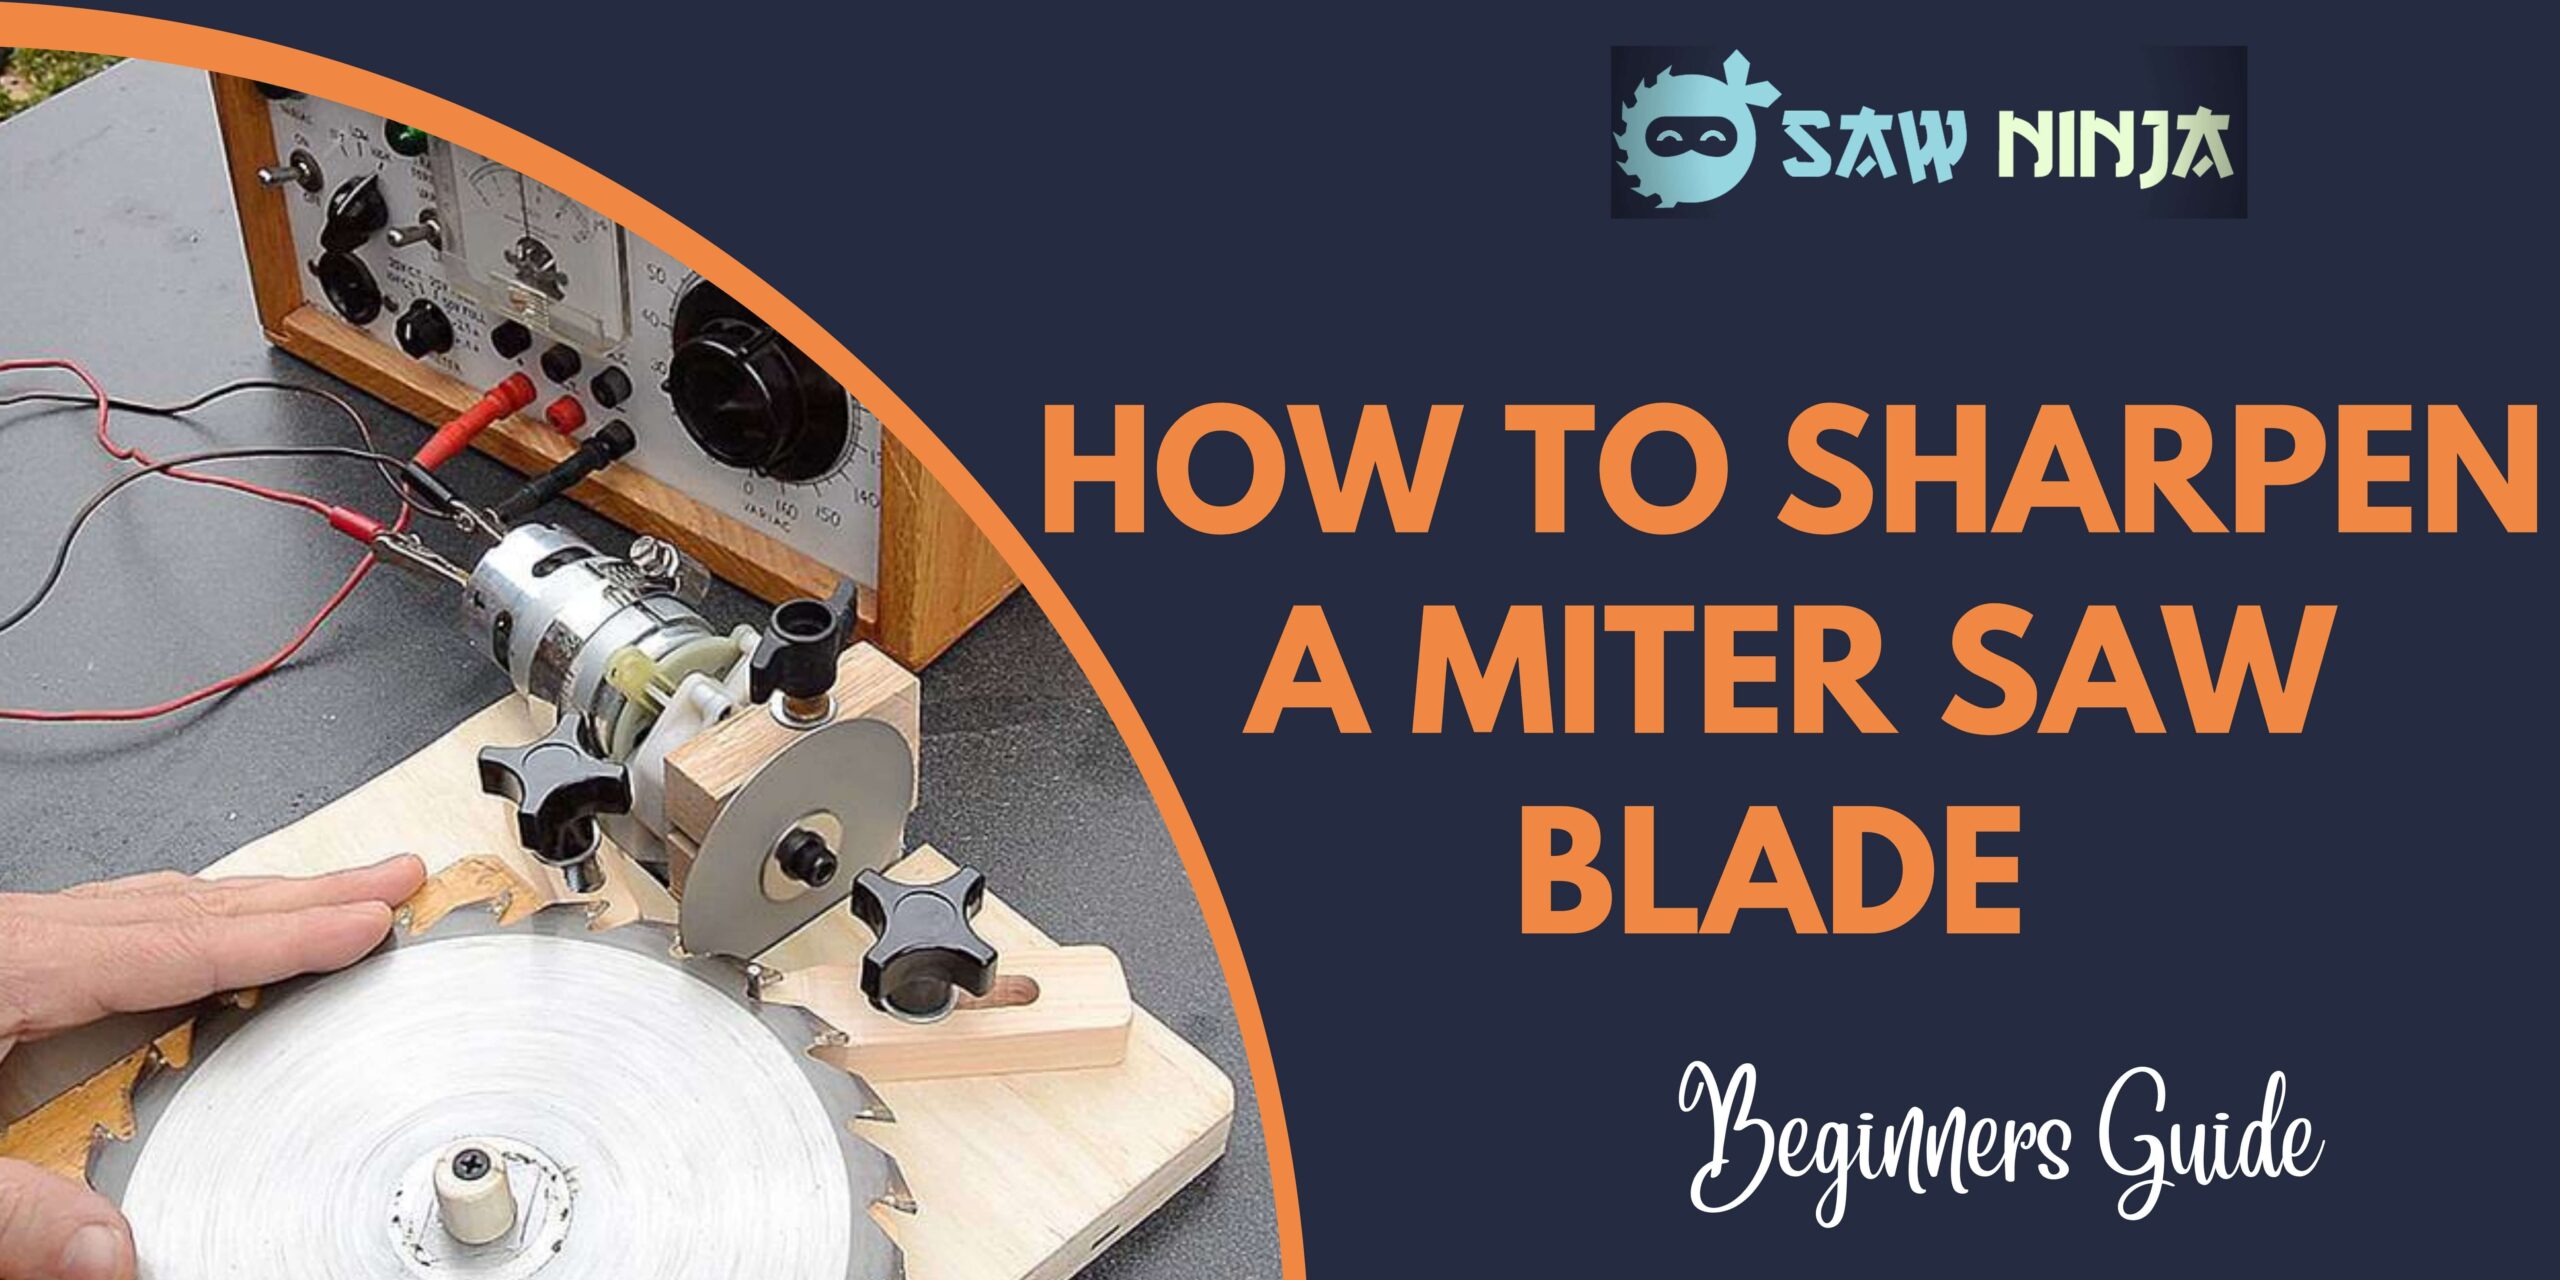 How to Sharpen a Miter Saw Blade